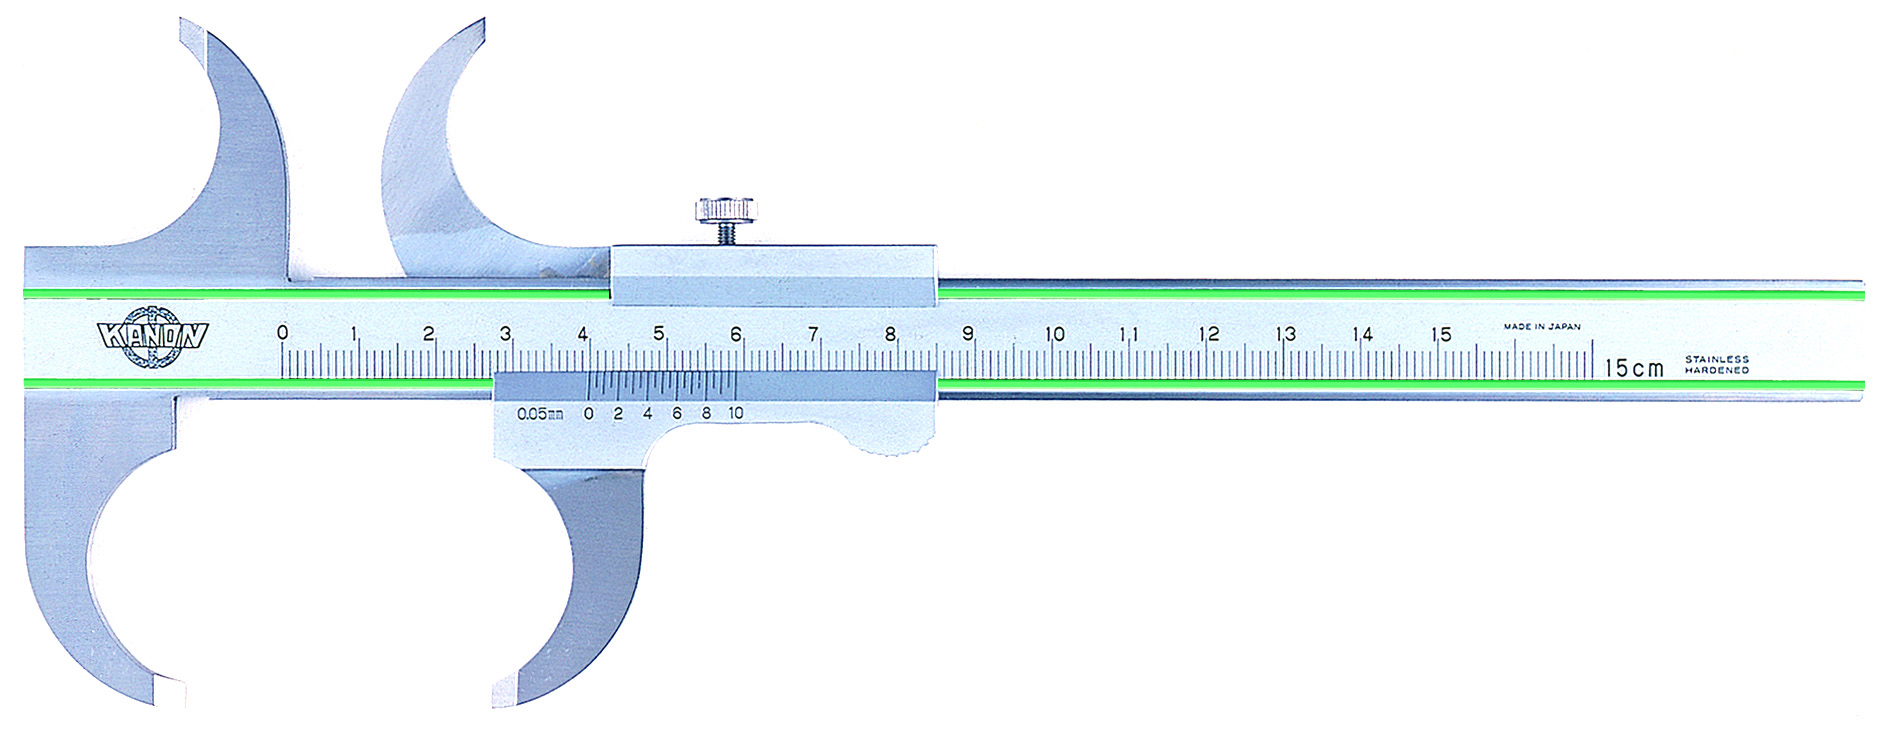 Vernier Caliper - Curre Jaw Type, Stainless Steel, RA